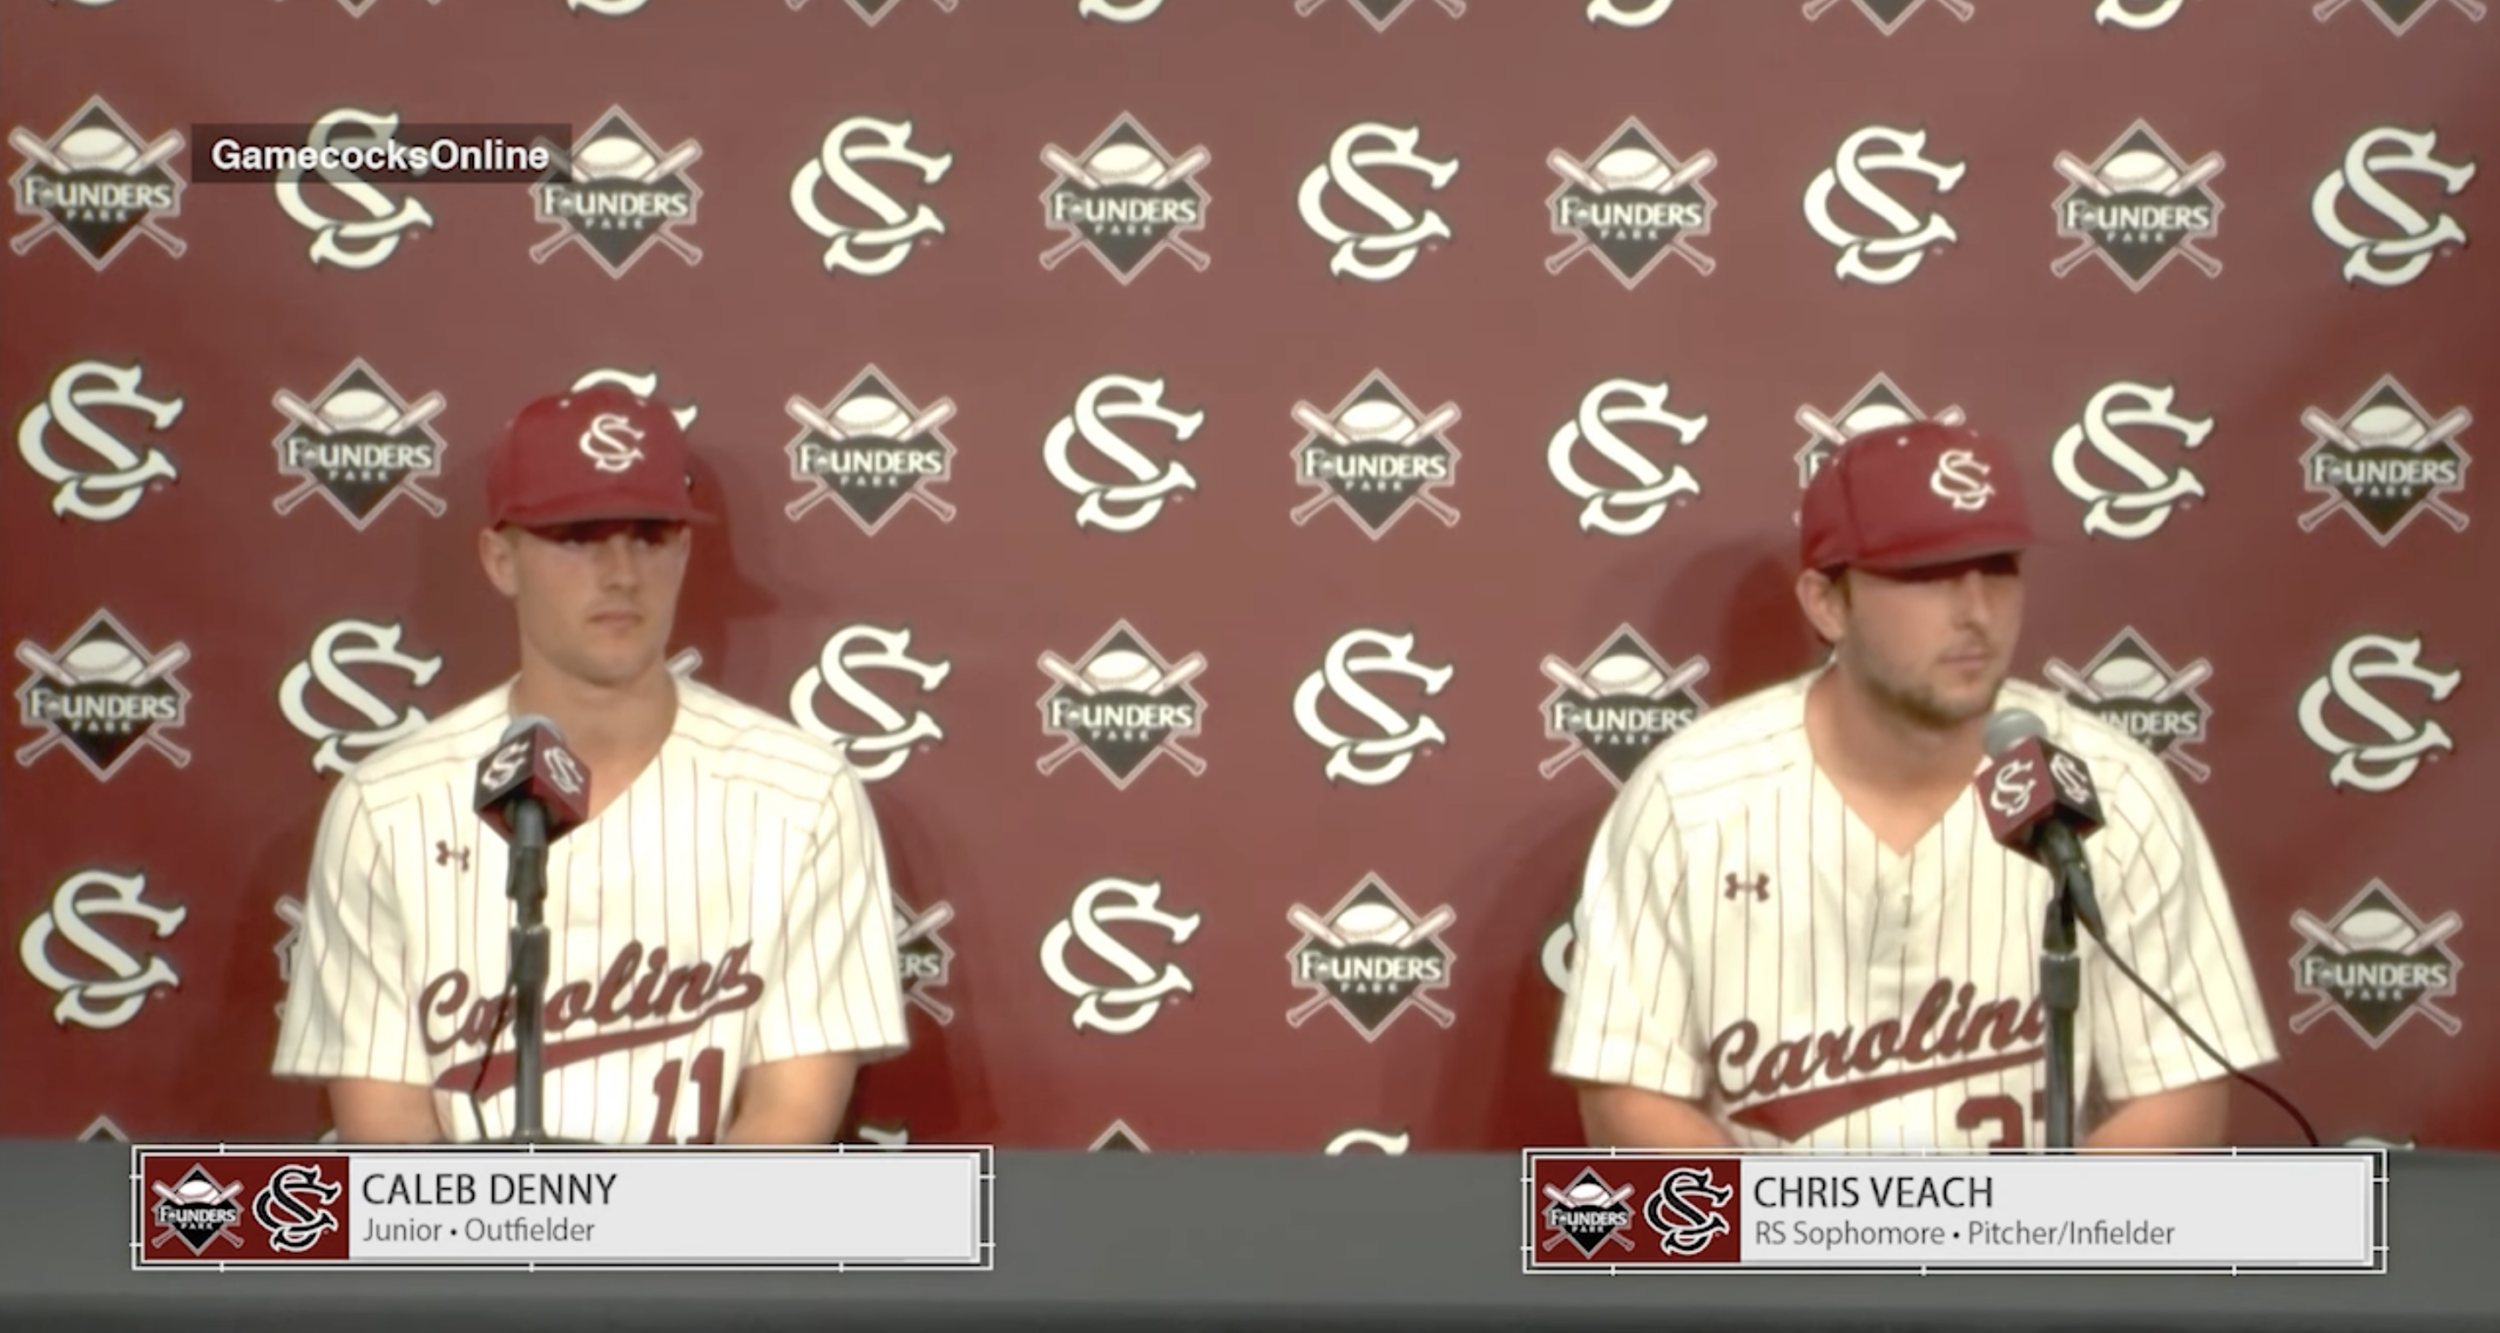 PostGame: (Penn) - Caleb Denny and Chris Veach News Conference